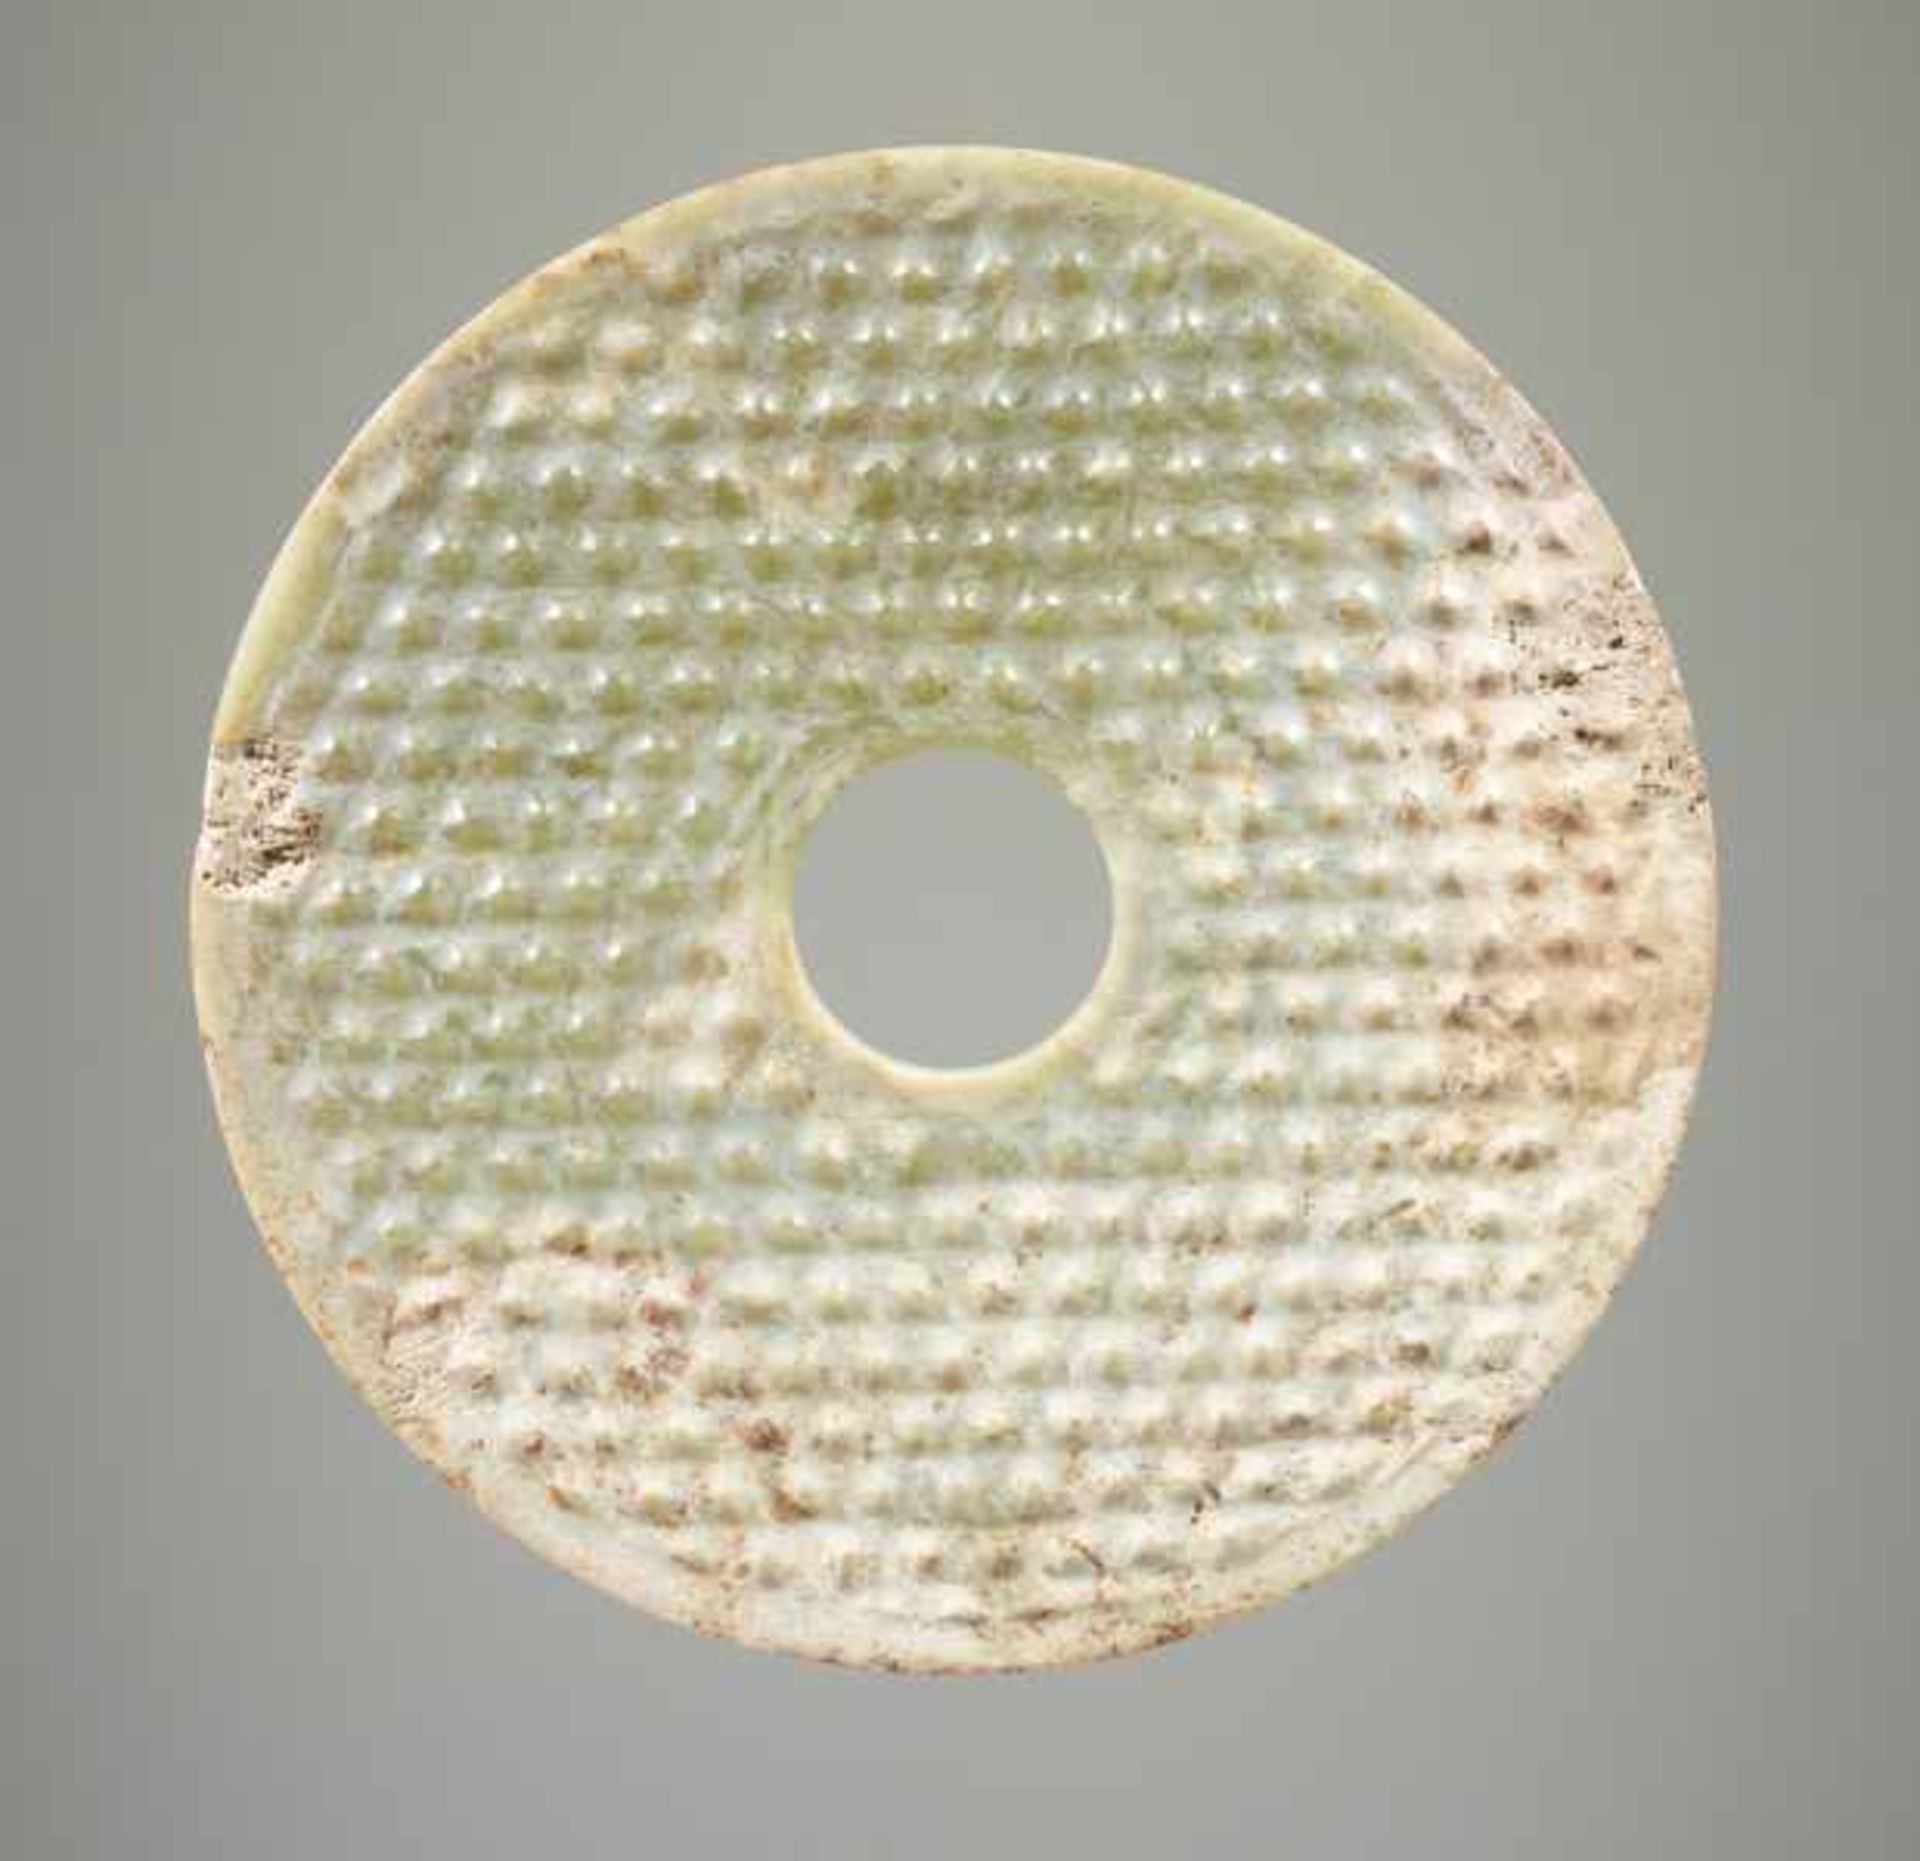 DISC BI Jade. China, Han dynasty, 206 BC - 220 CEMedium-sized bi-disc with prominent, strictly